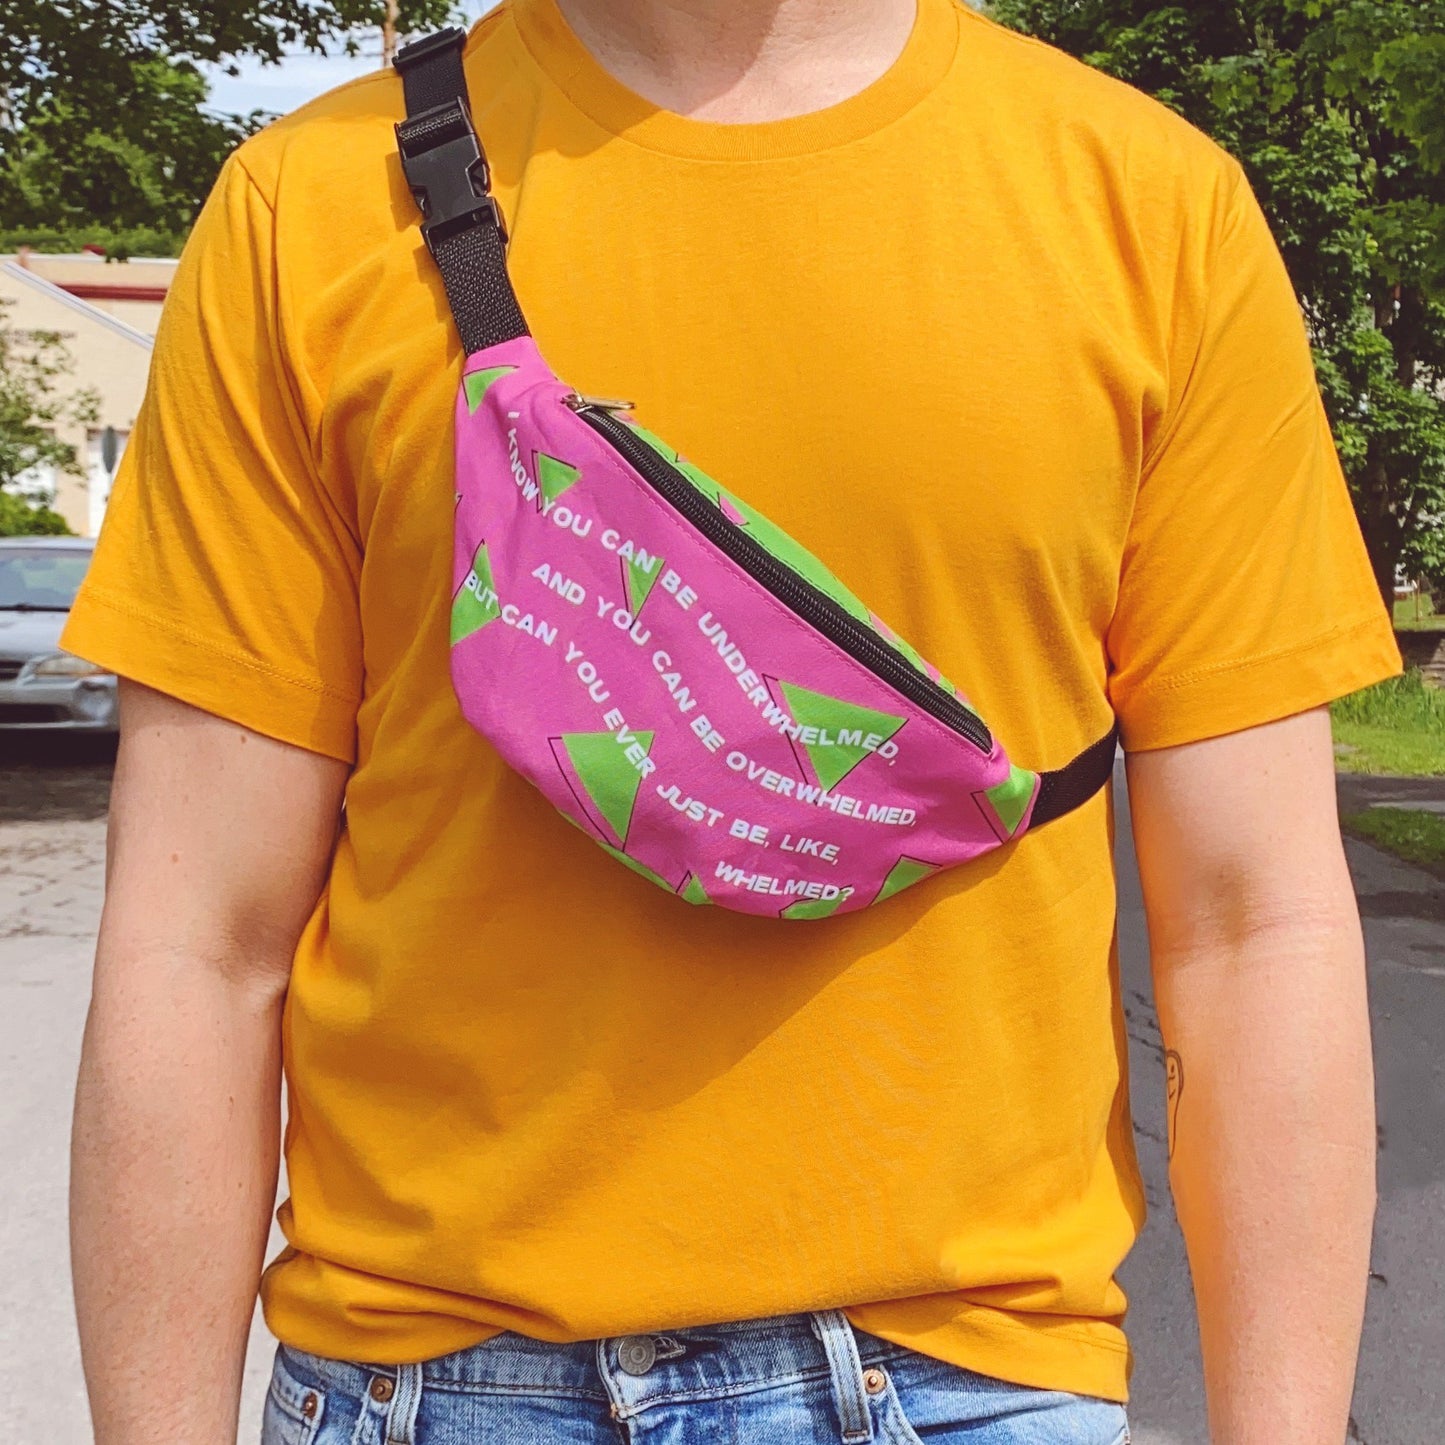 10 Things I Hate About You Belt Bag Fanny Pack - Totally Good Time